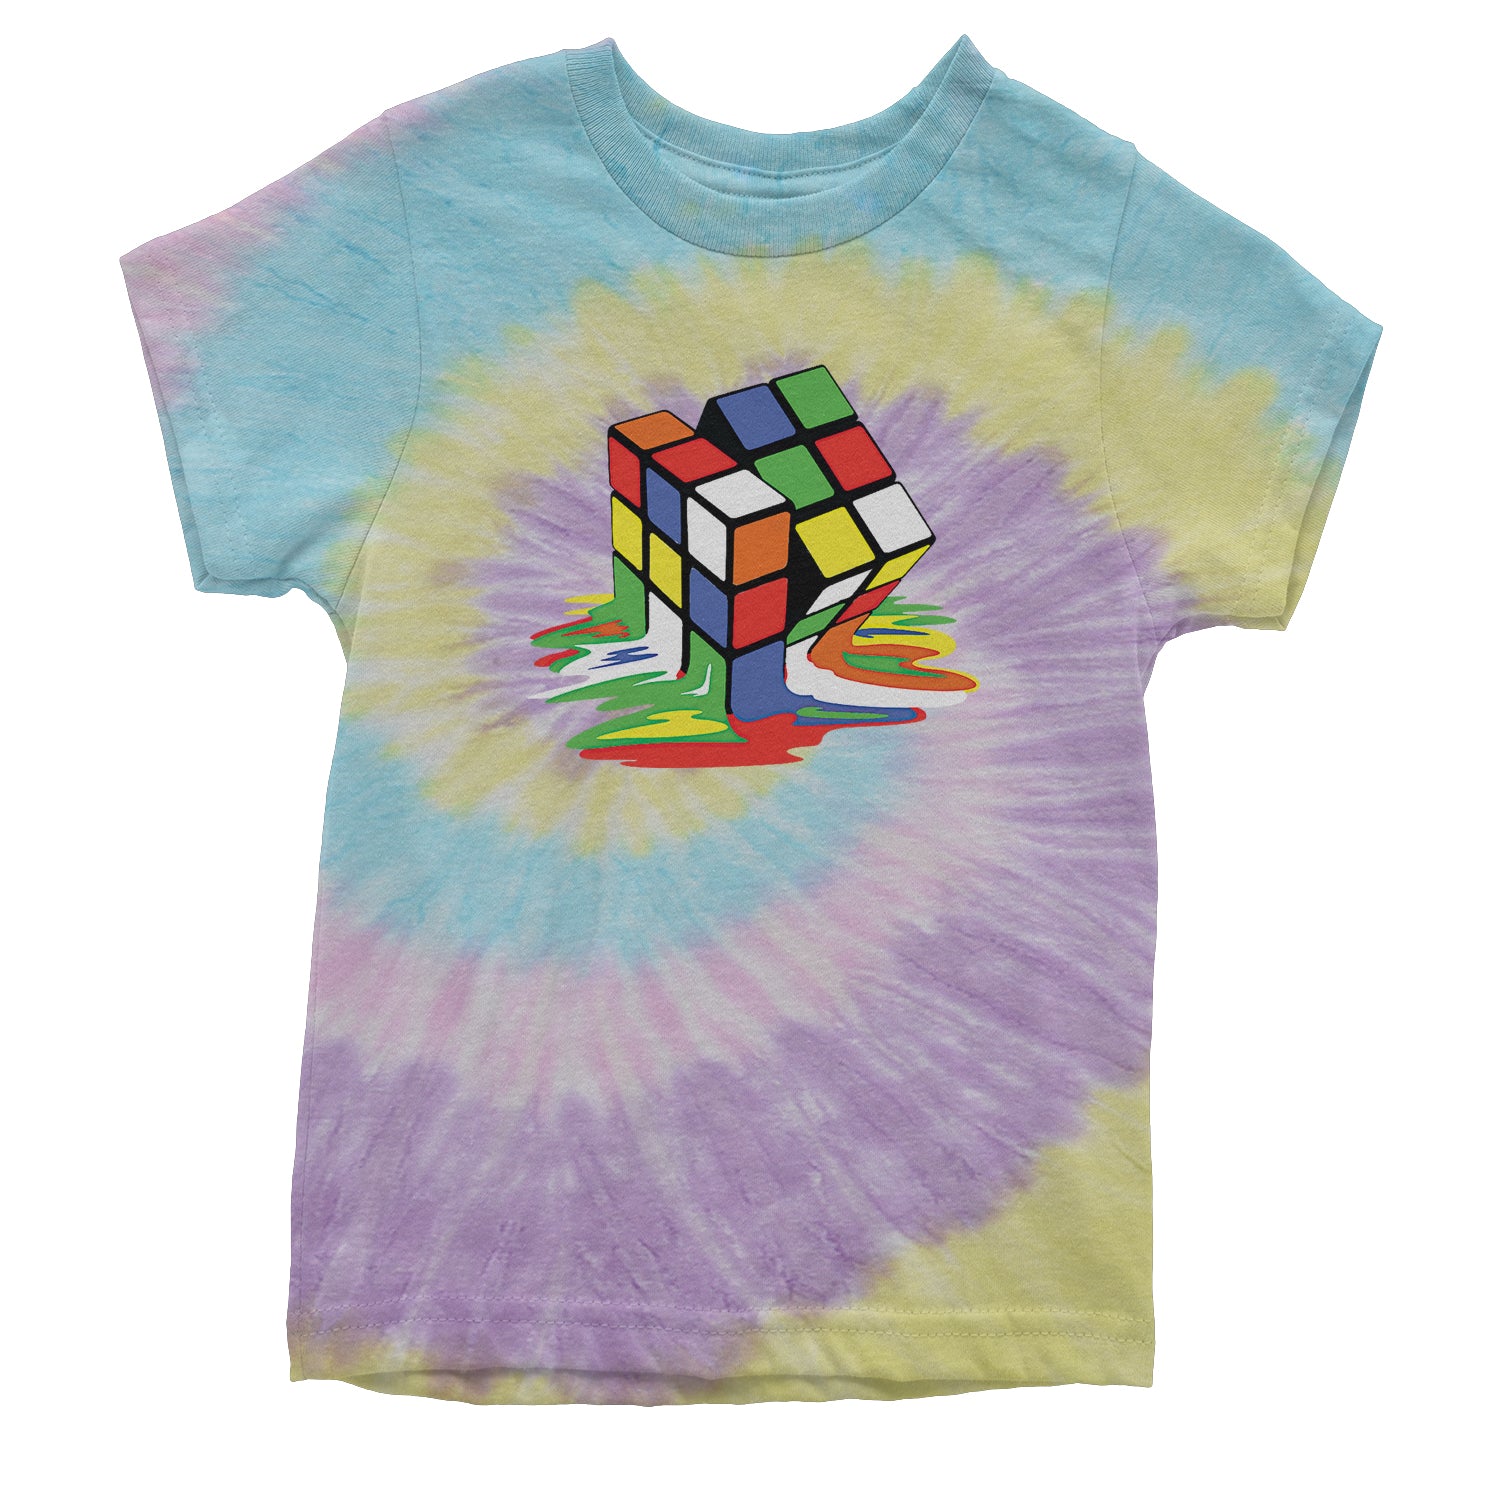 Melting Multi-Colored Cube Youth T-shirt gamer, gaming, nerd, shirt by Expression Tees